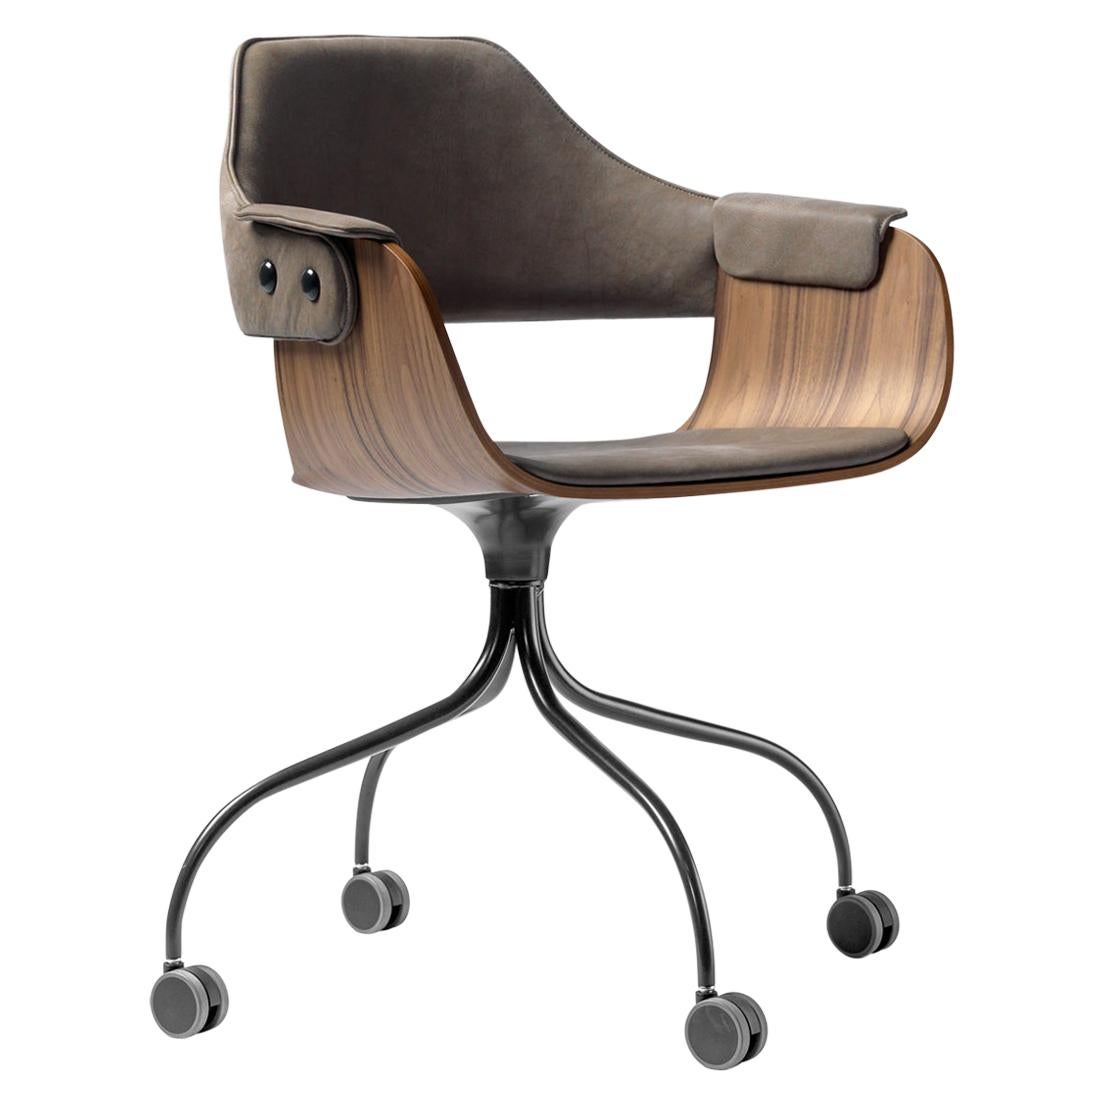 Upholstered desk chair in walnut and leather on casters. 